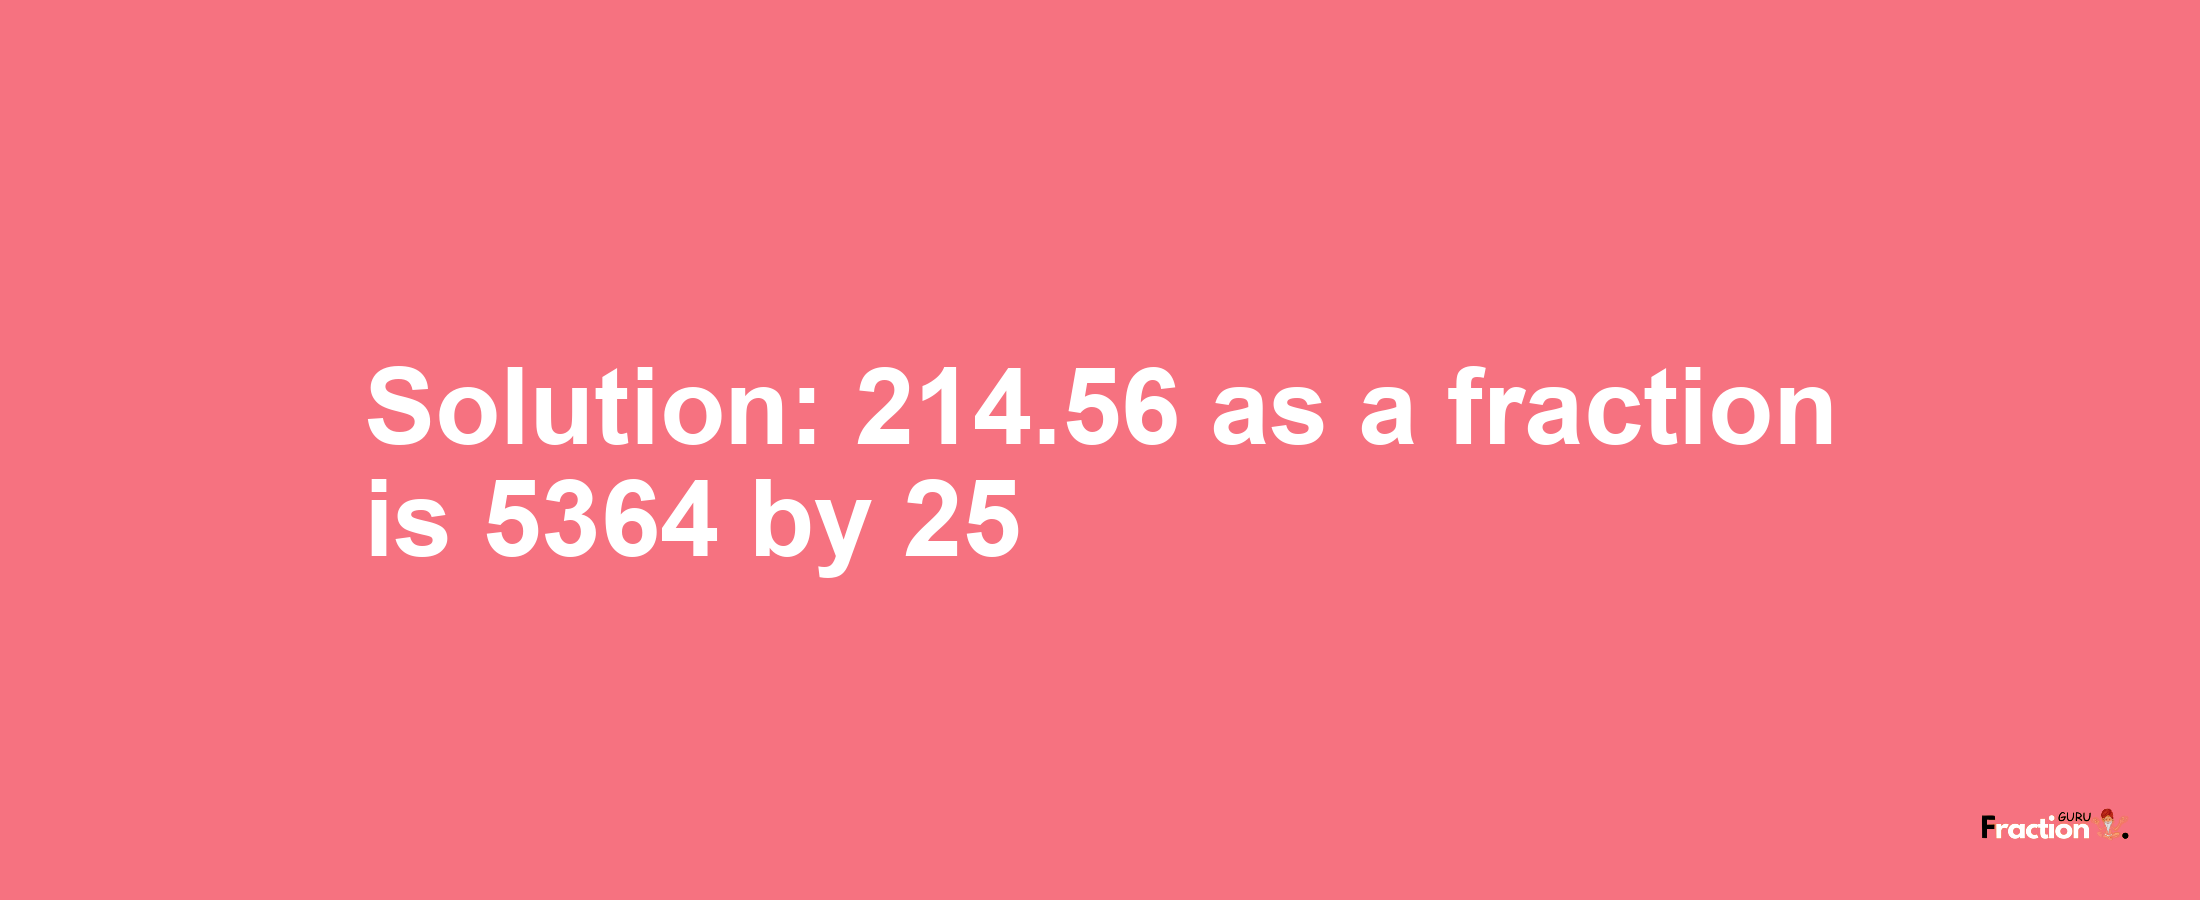 Solution:214.56 as a fraction is 5364/25